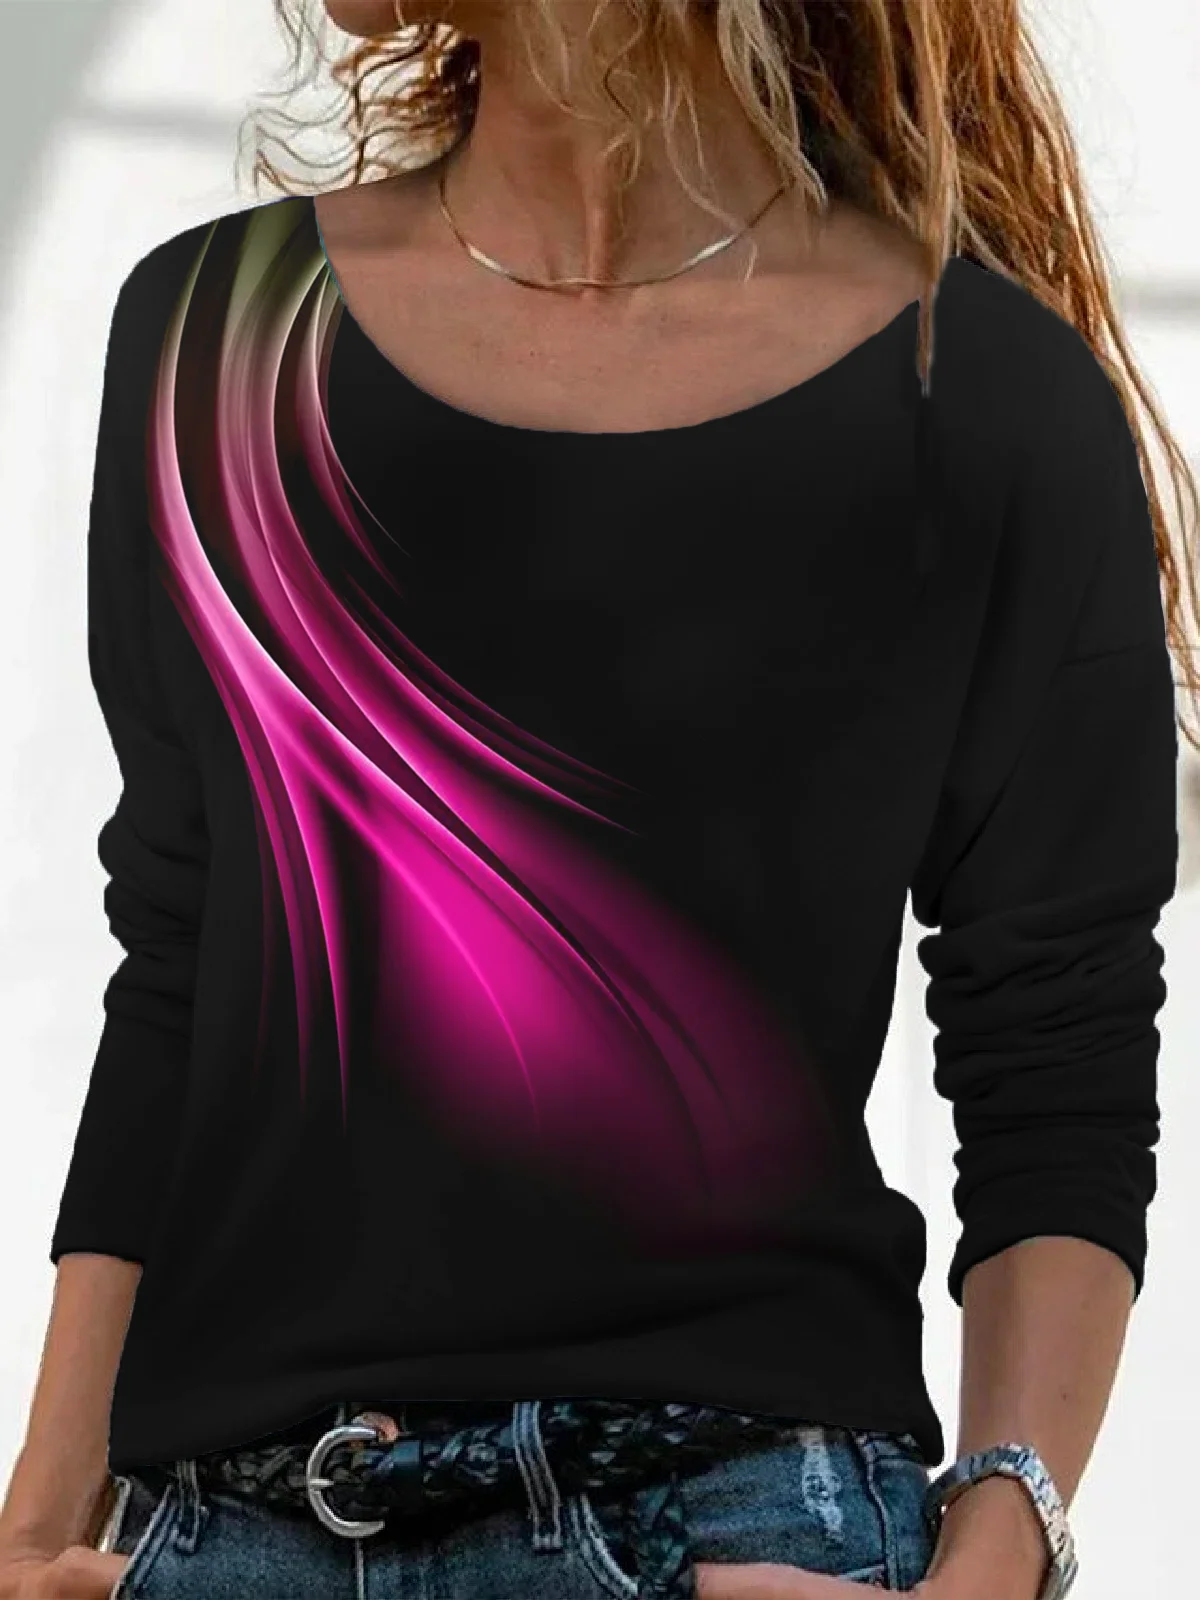 Casual Abstract Autumn Micro-Elasticity Jersey Long sleeve Crew Neck Regular H-Line T-shirt for Women